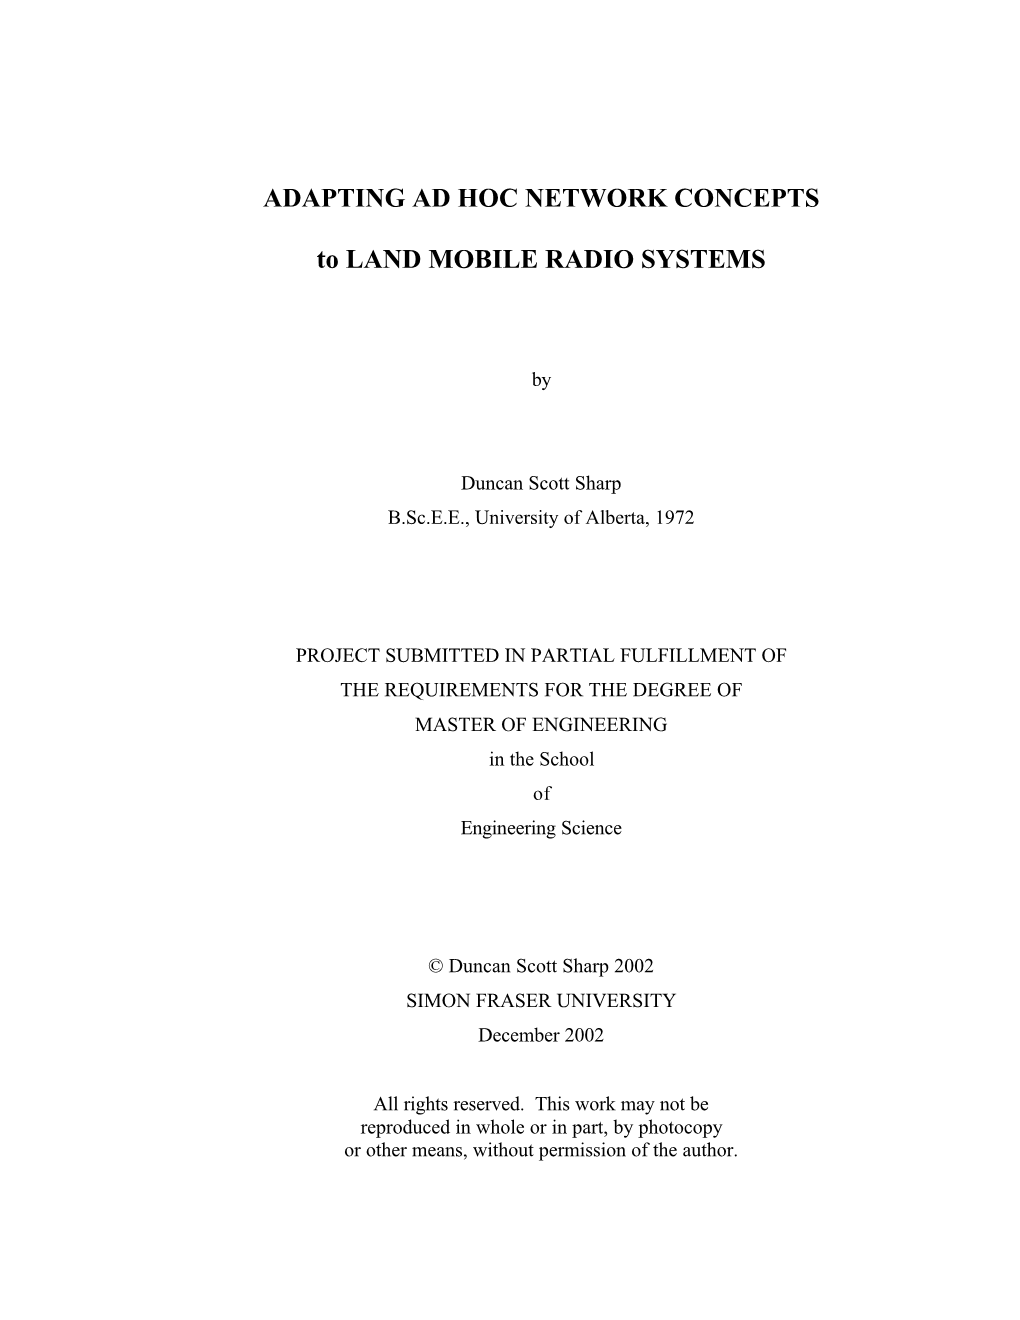 Adapting Ad Hoc Network Concepts to Land Mobile Radio Systems